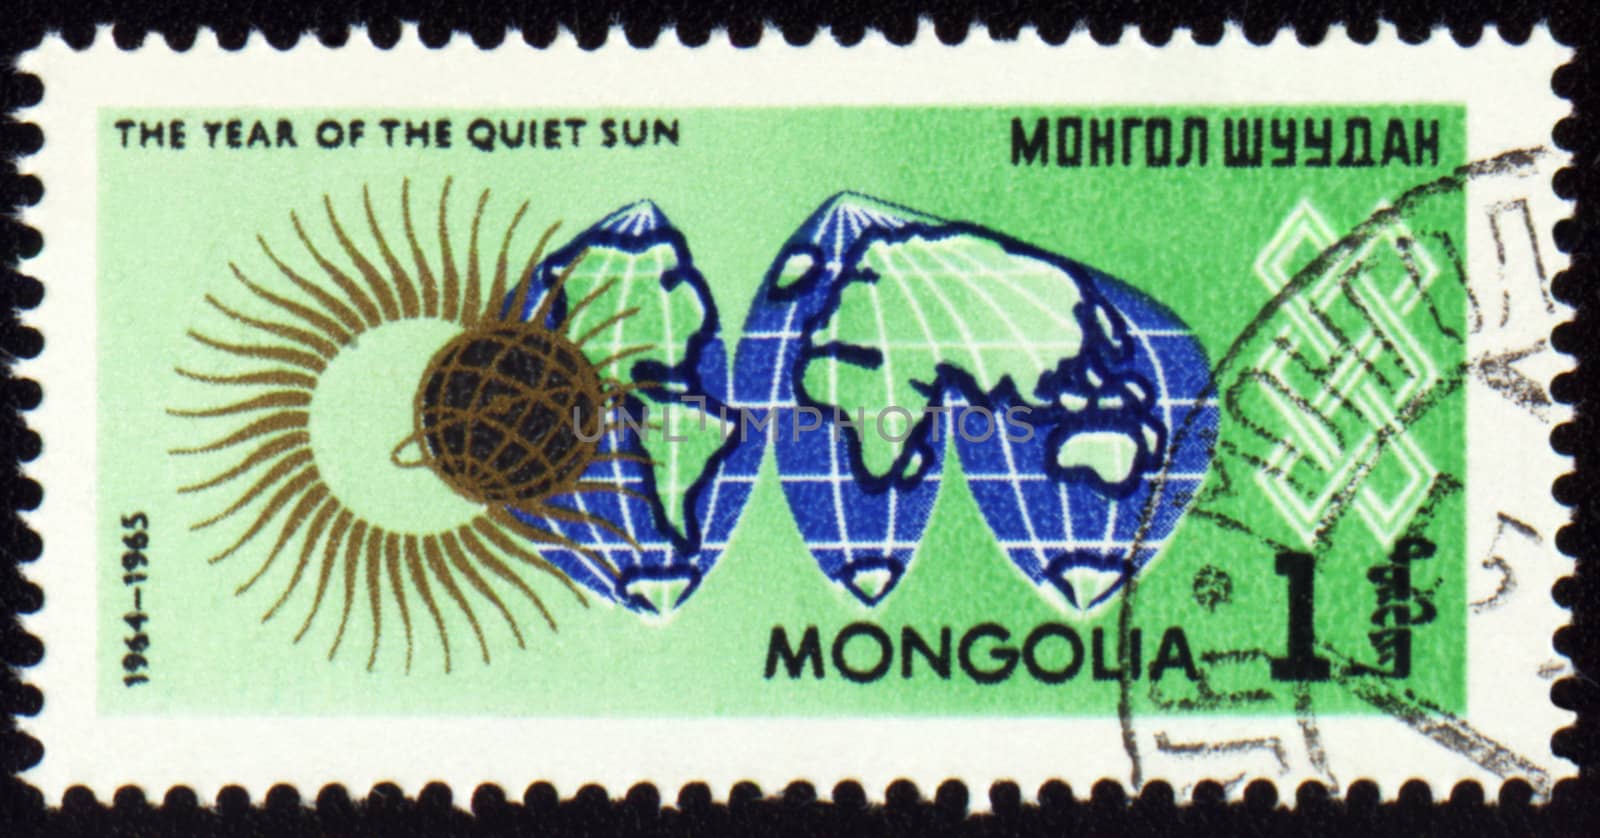 MONGOLIA - CIRCA 1965: stamp printed in Mongolia, shows map Globe and symbol of the Sun, series "The year of quiet Sun", circa 1965